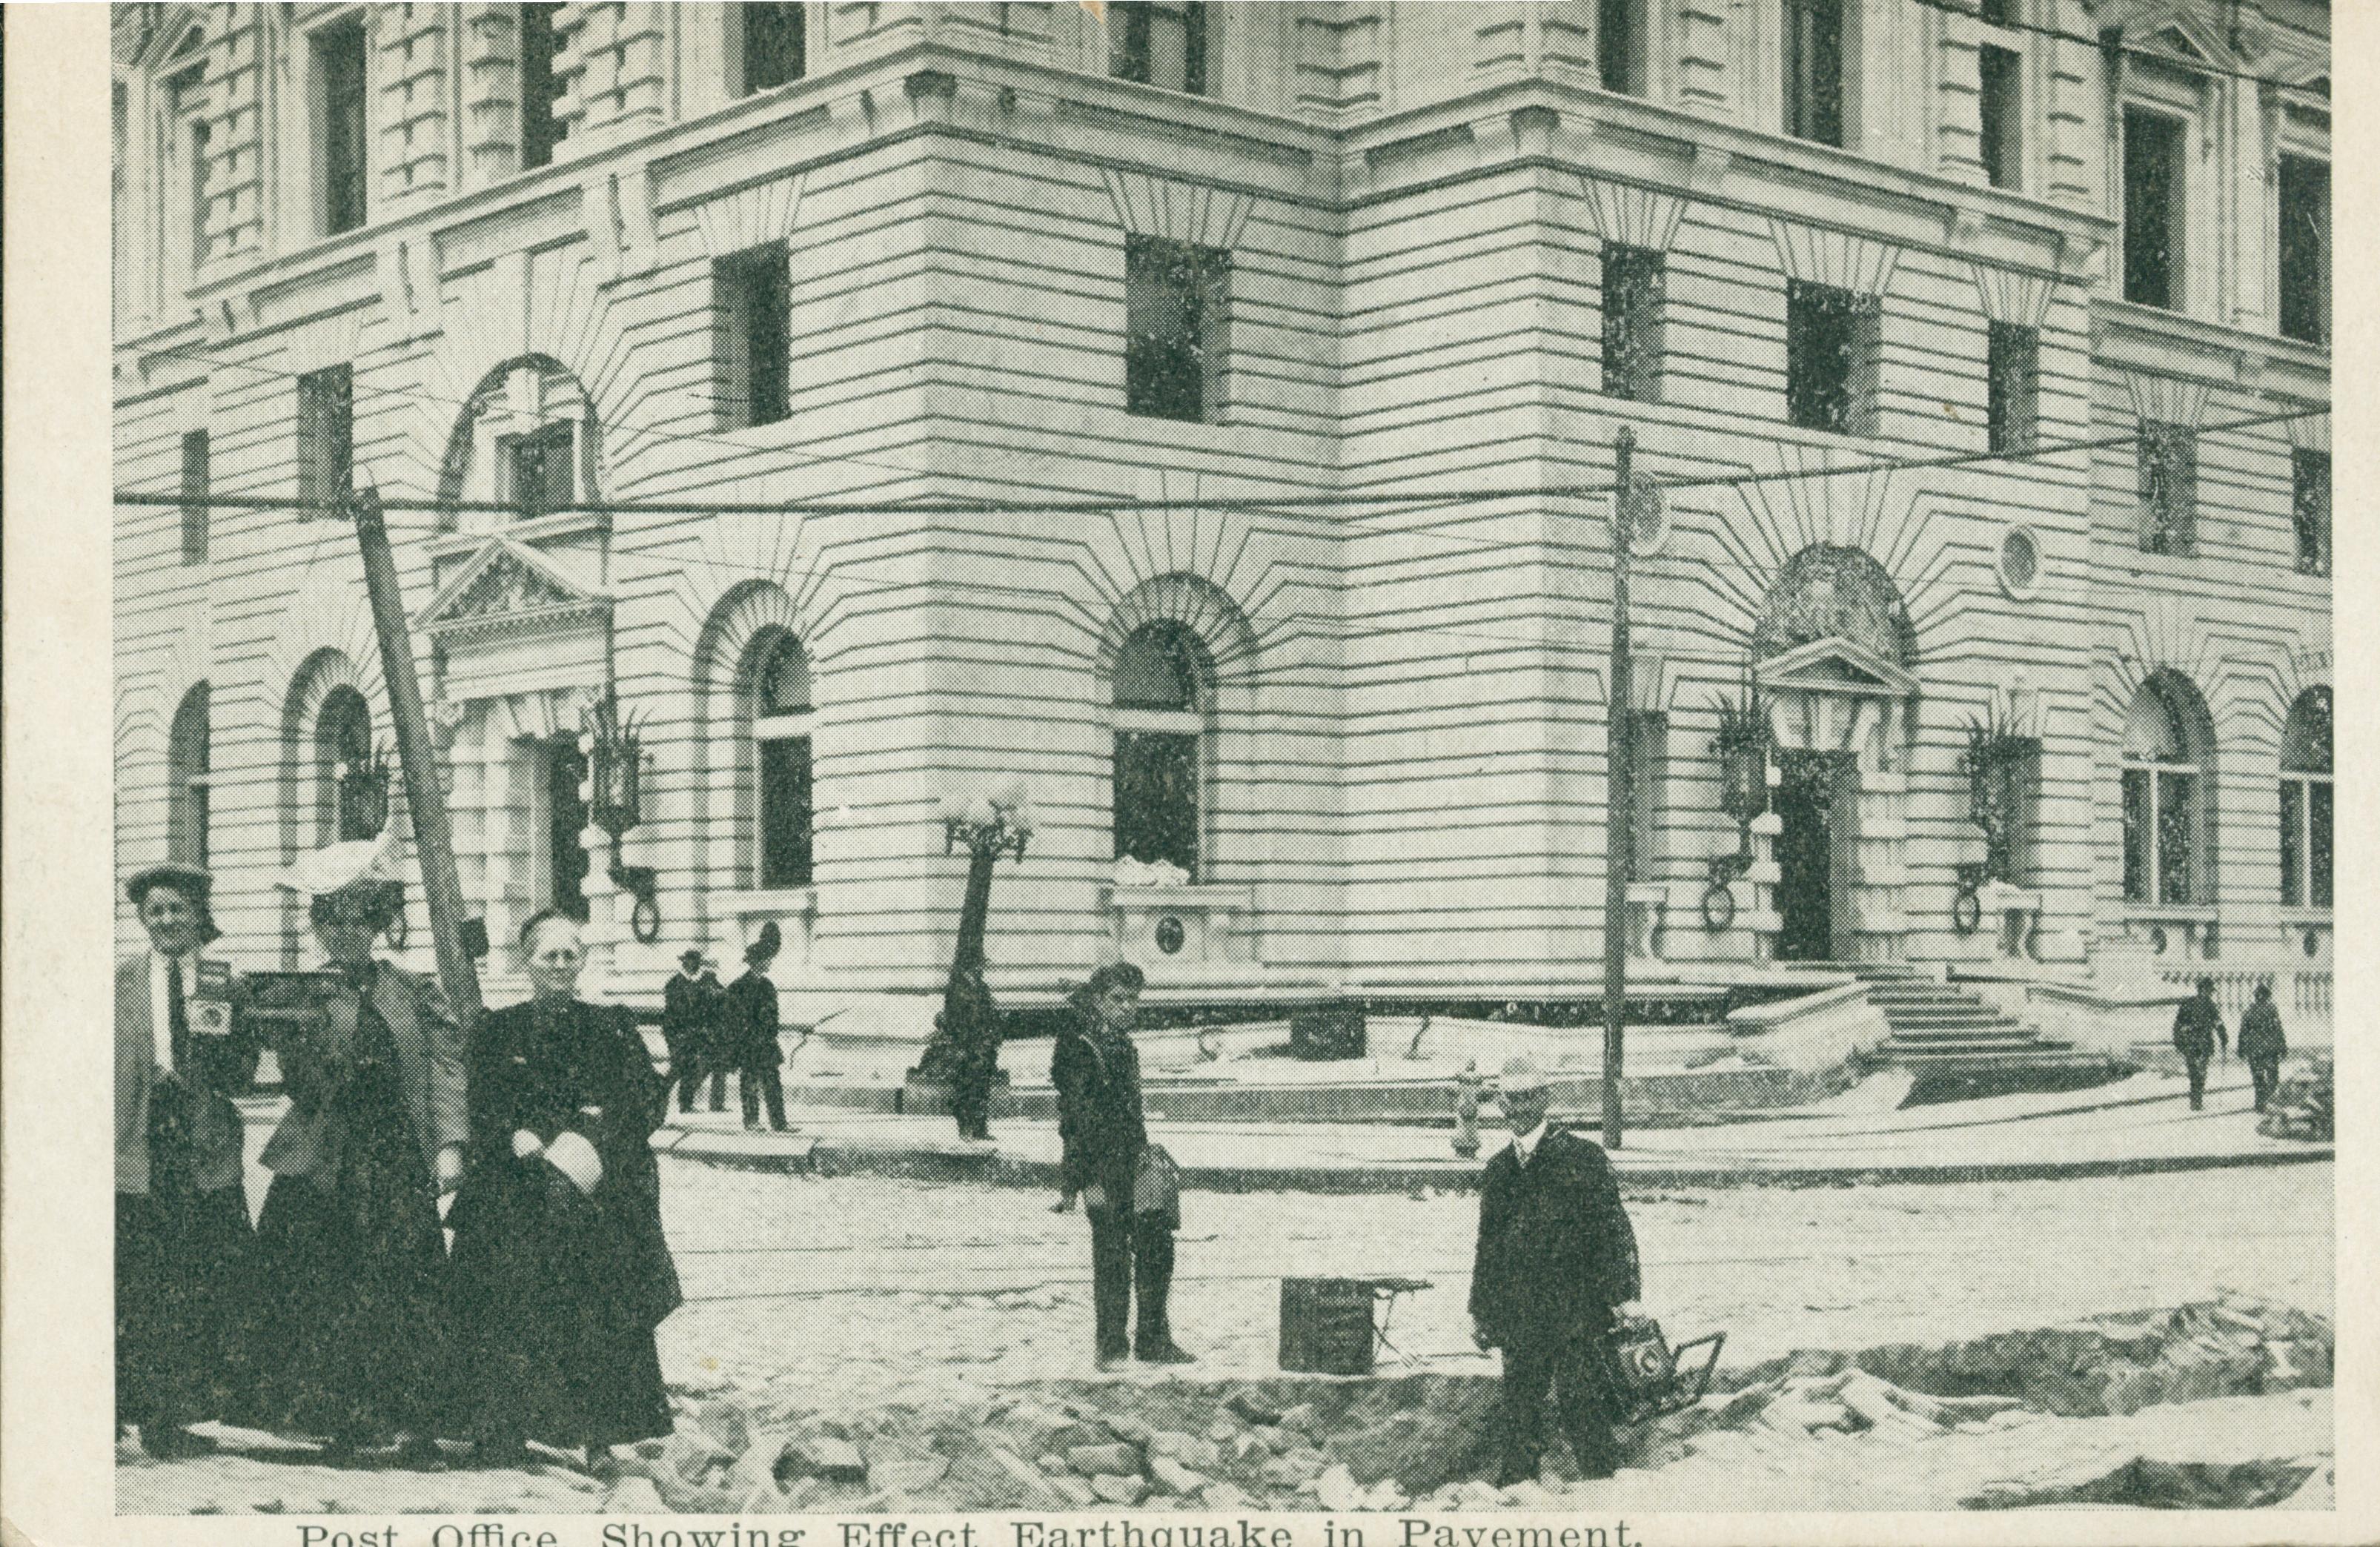 Shows the San Francisco Post office and ruptures in the pavement from the Earthquake